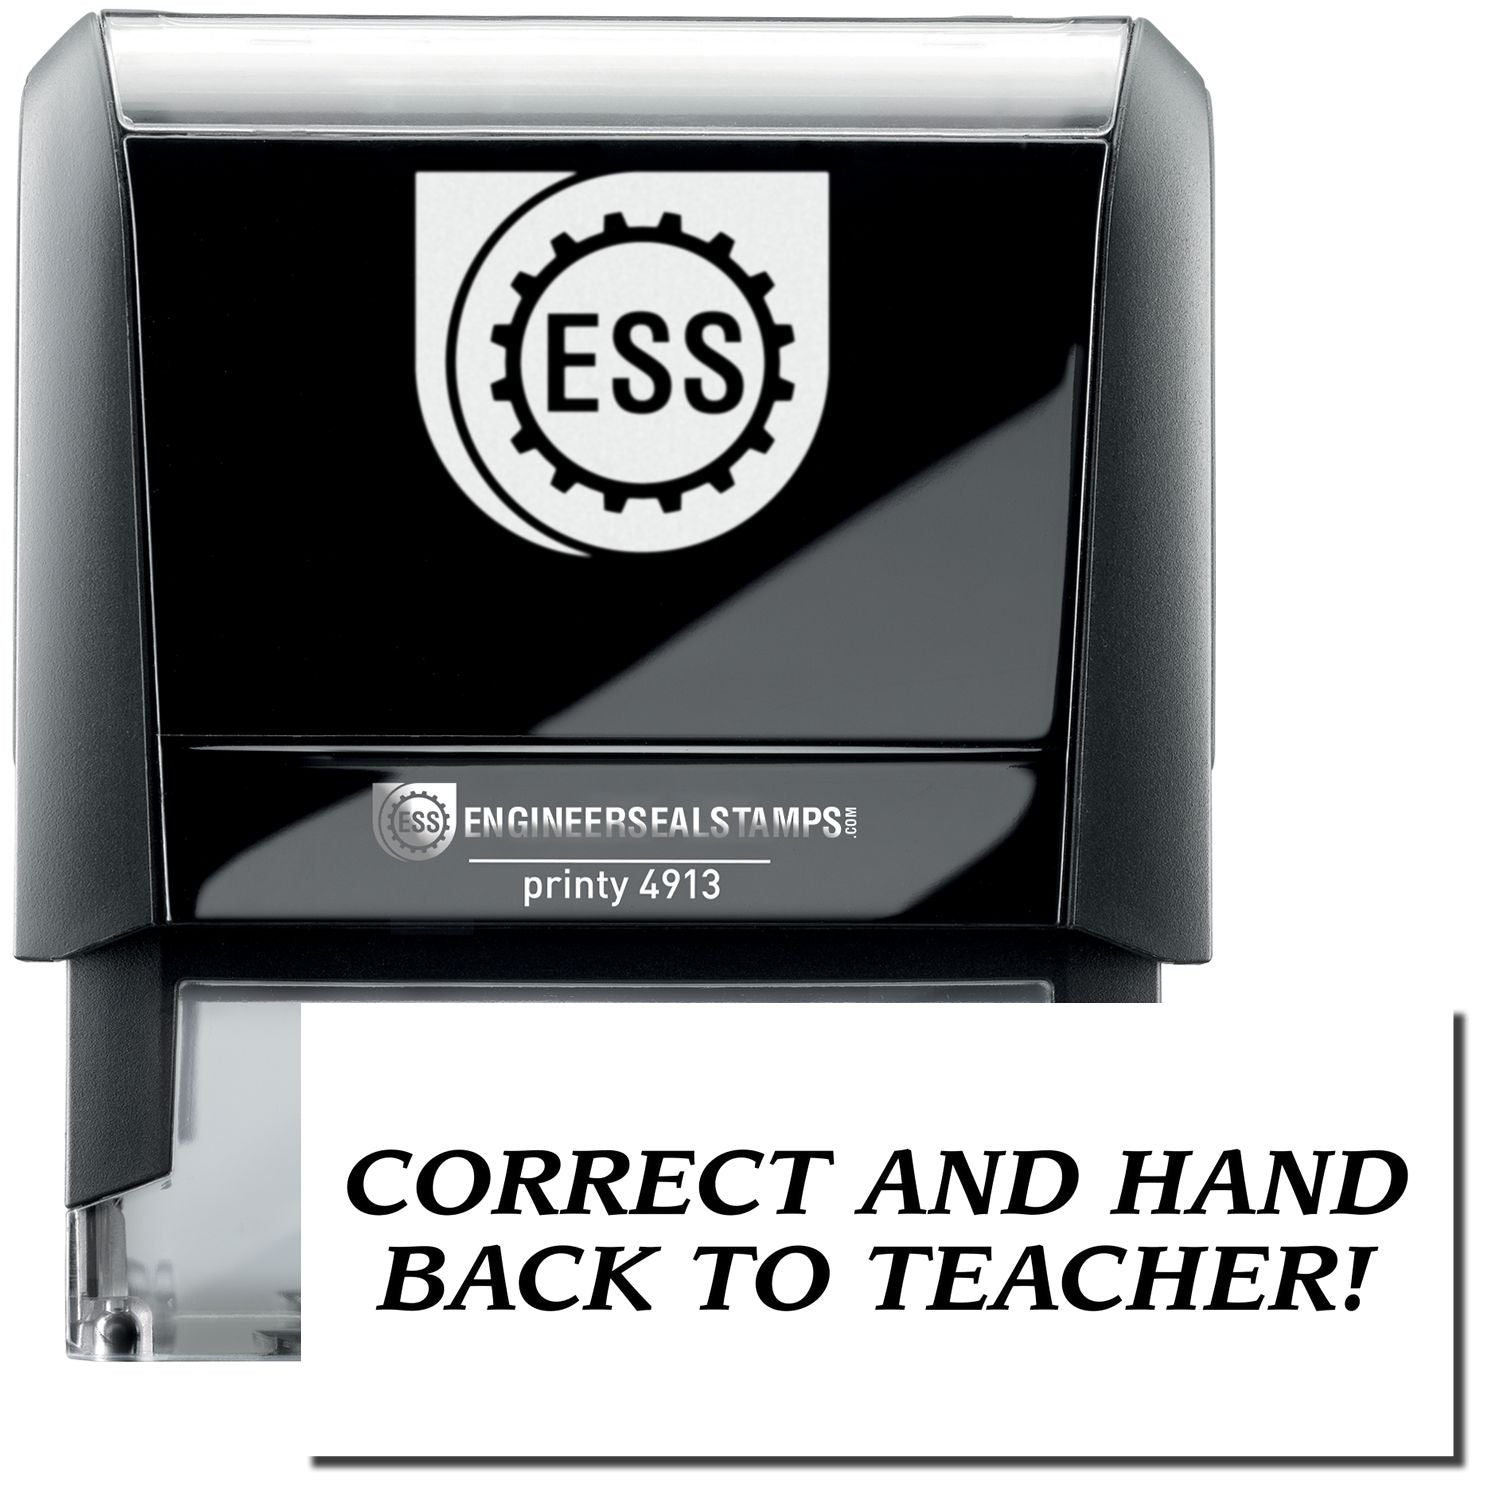 A self-inking stamp with a stamped image showing how the text "CORRECT AND HAND BACK TO TEACHER!" in a large font is displayed by it after stamping.